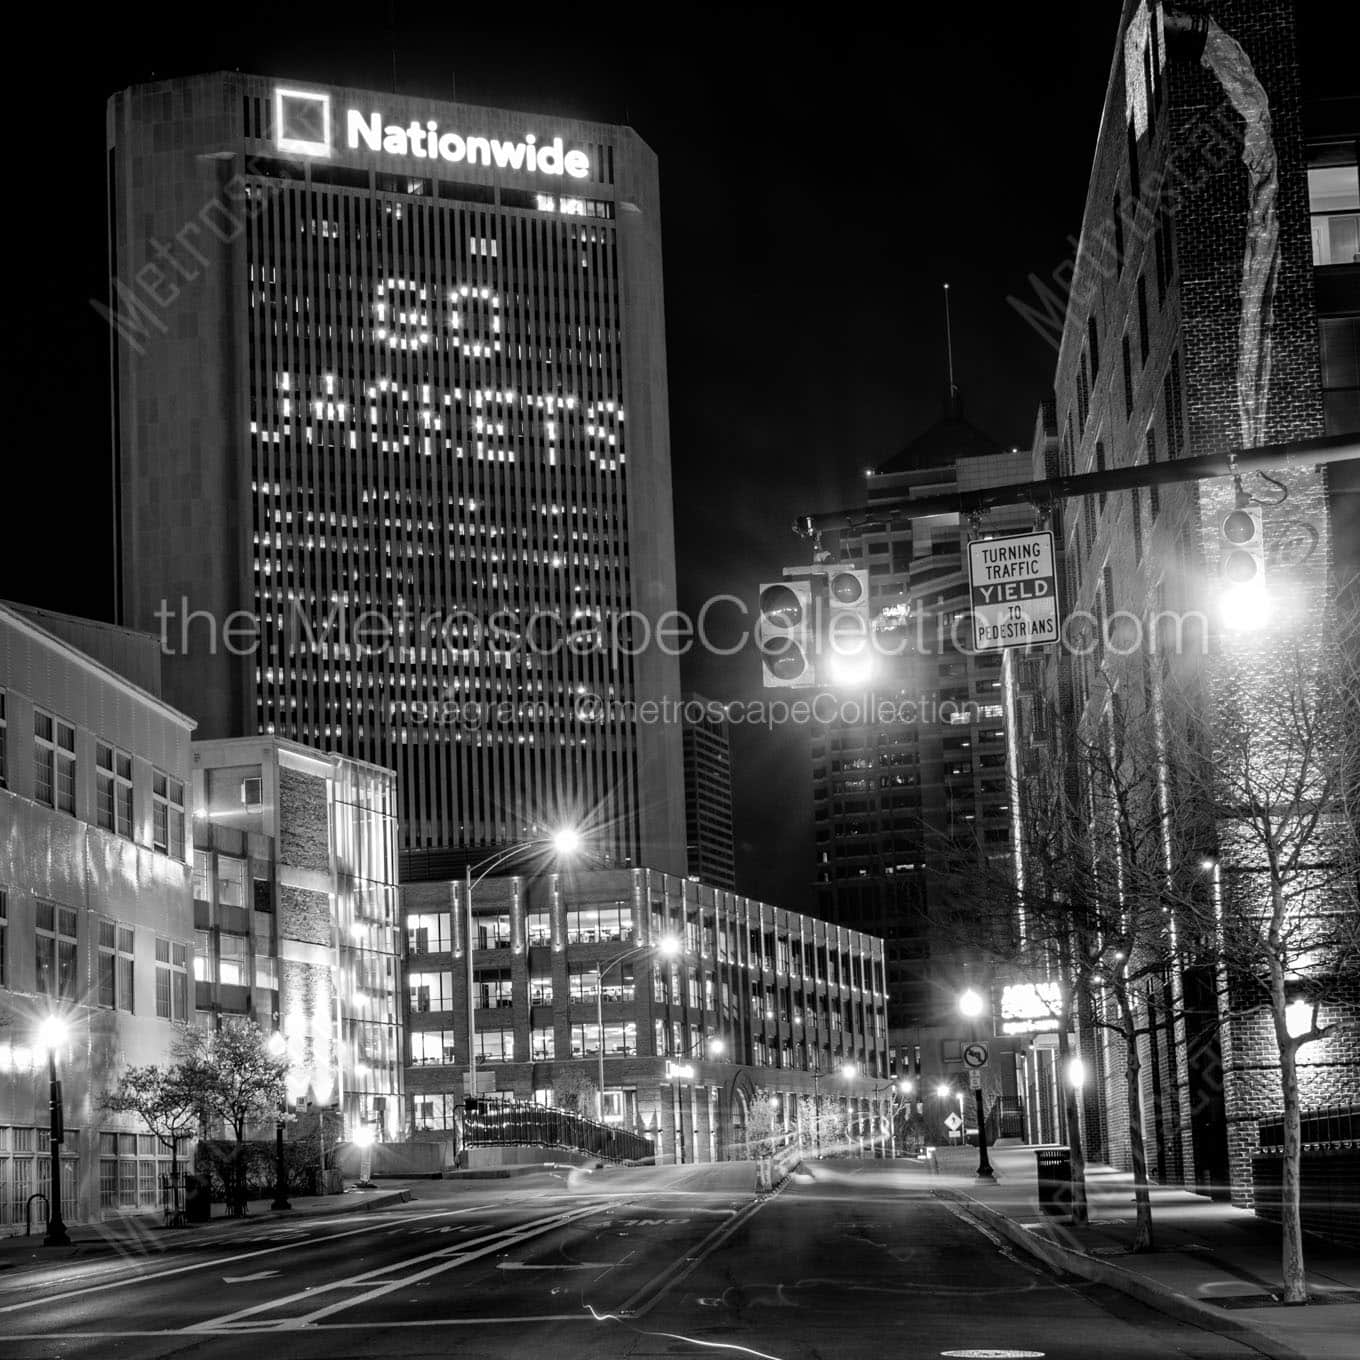 go jackets in nationwide building Black & White Office Art